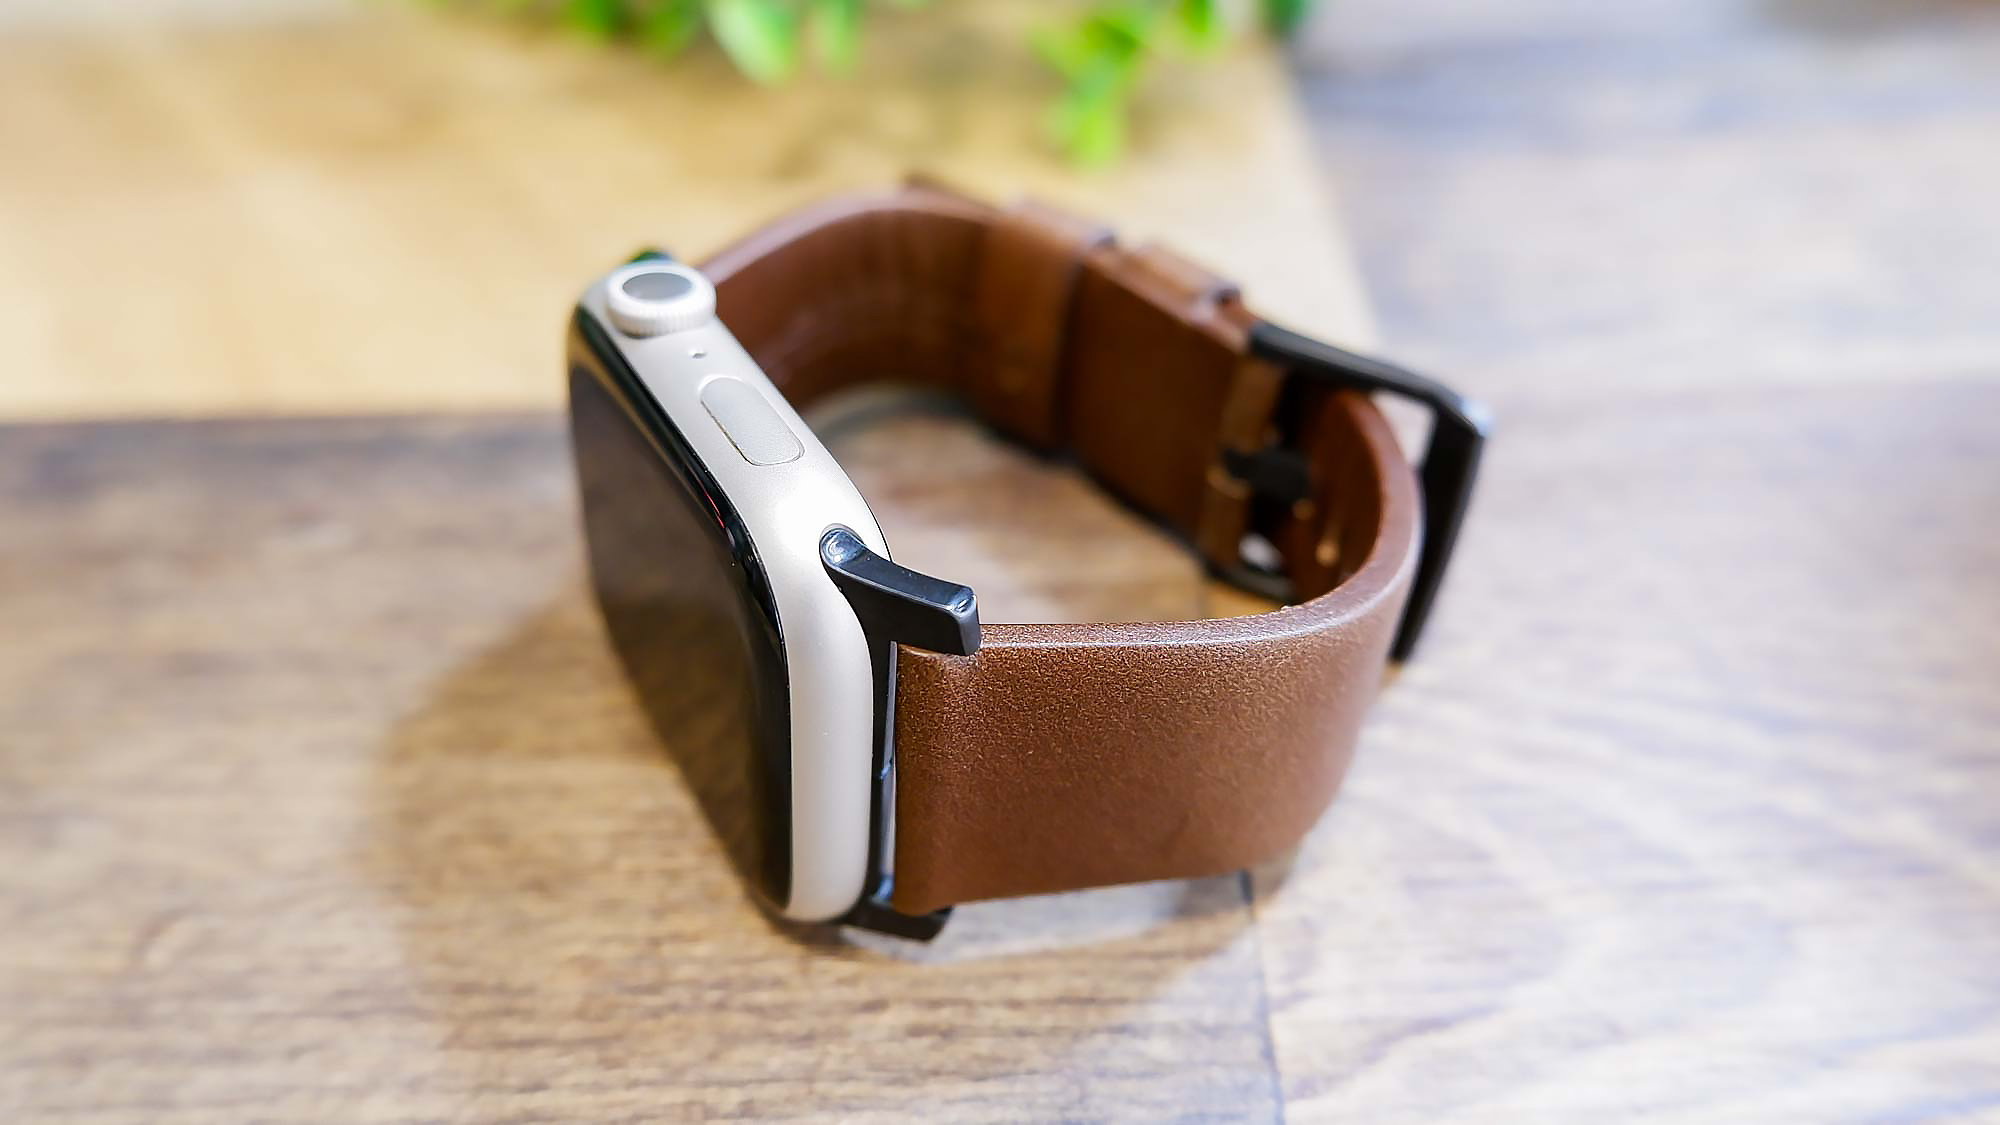 Best Apple Watch bands: Nomad Modern Band